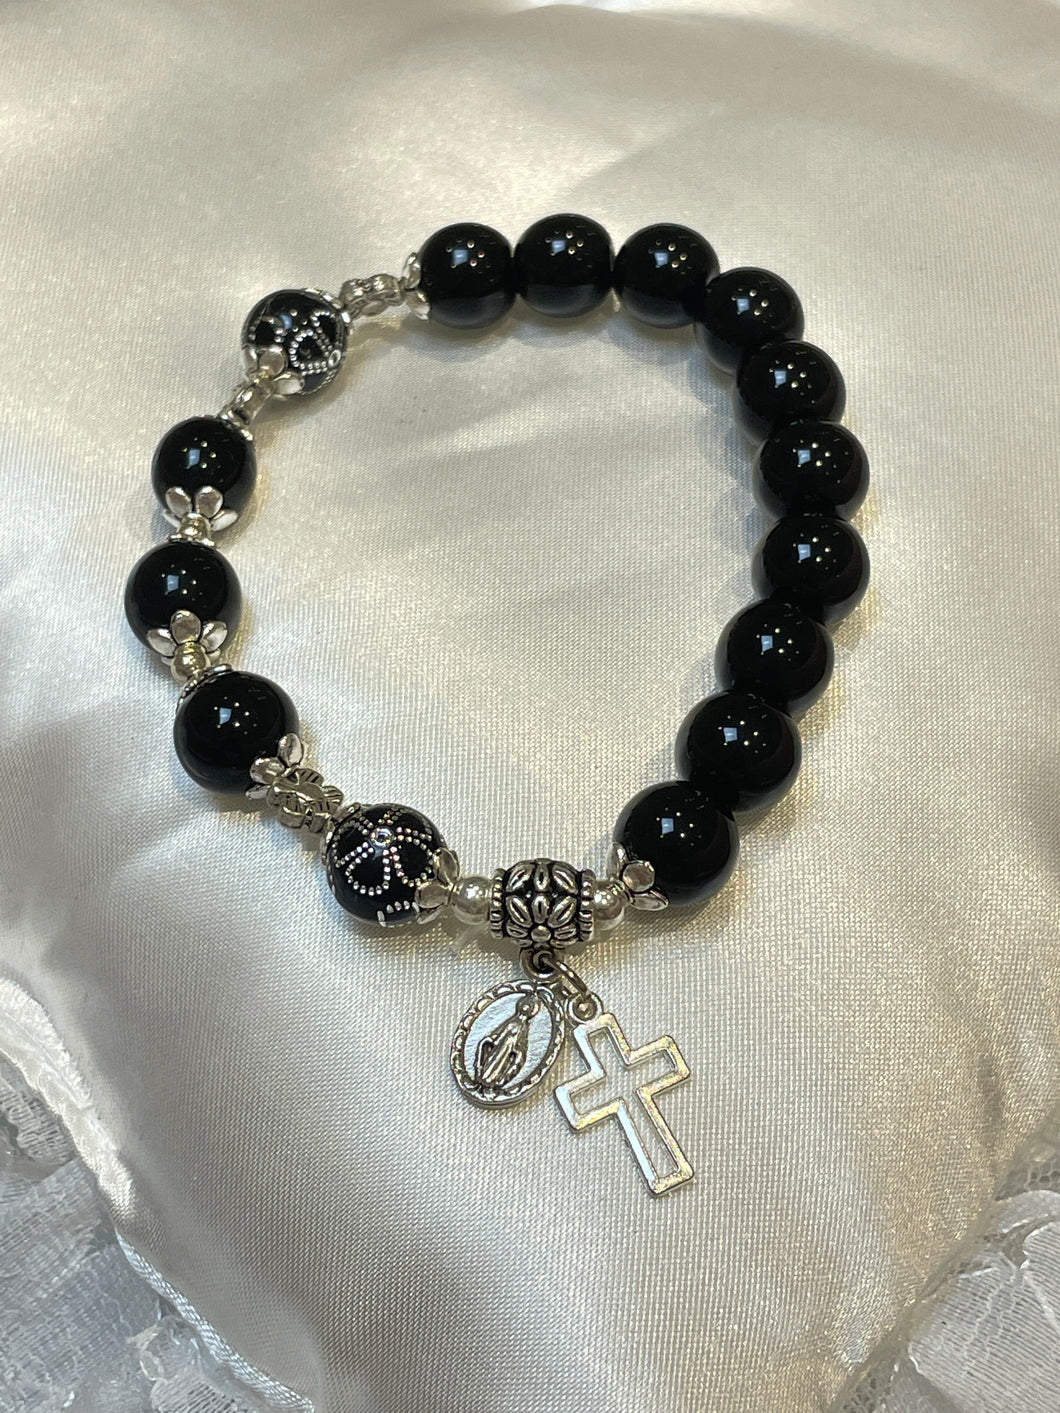 Black Gemstone Rosary Bracelet with Cross and Miraculous Medal Charms